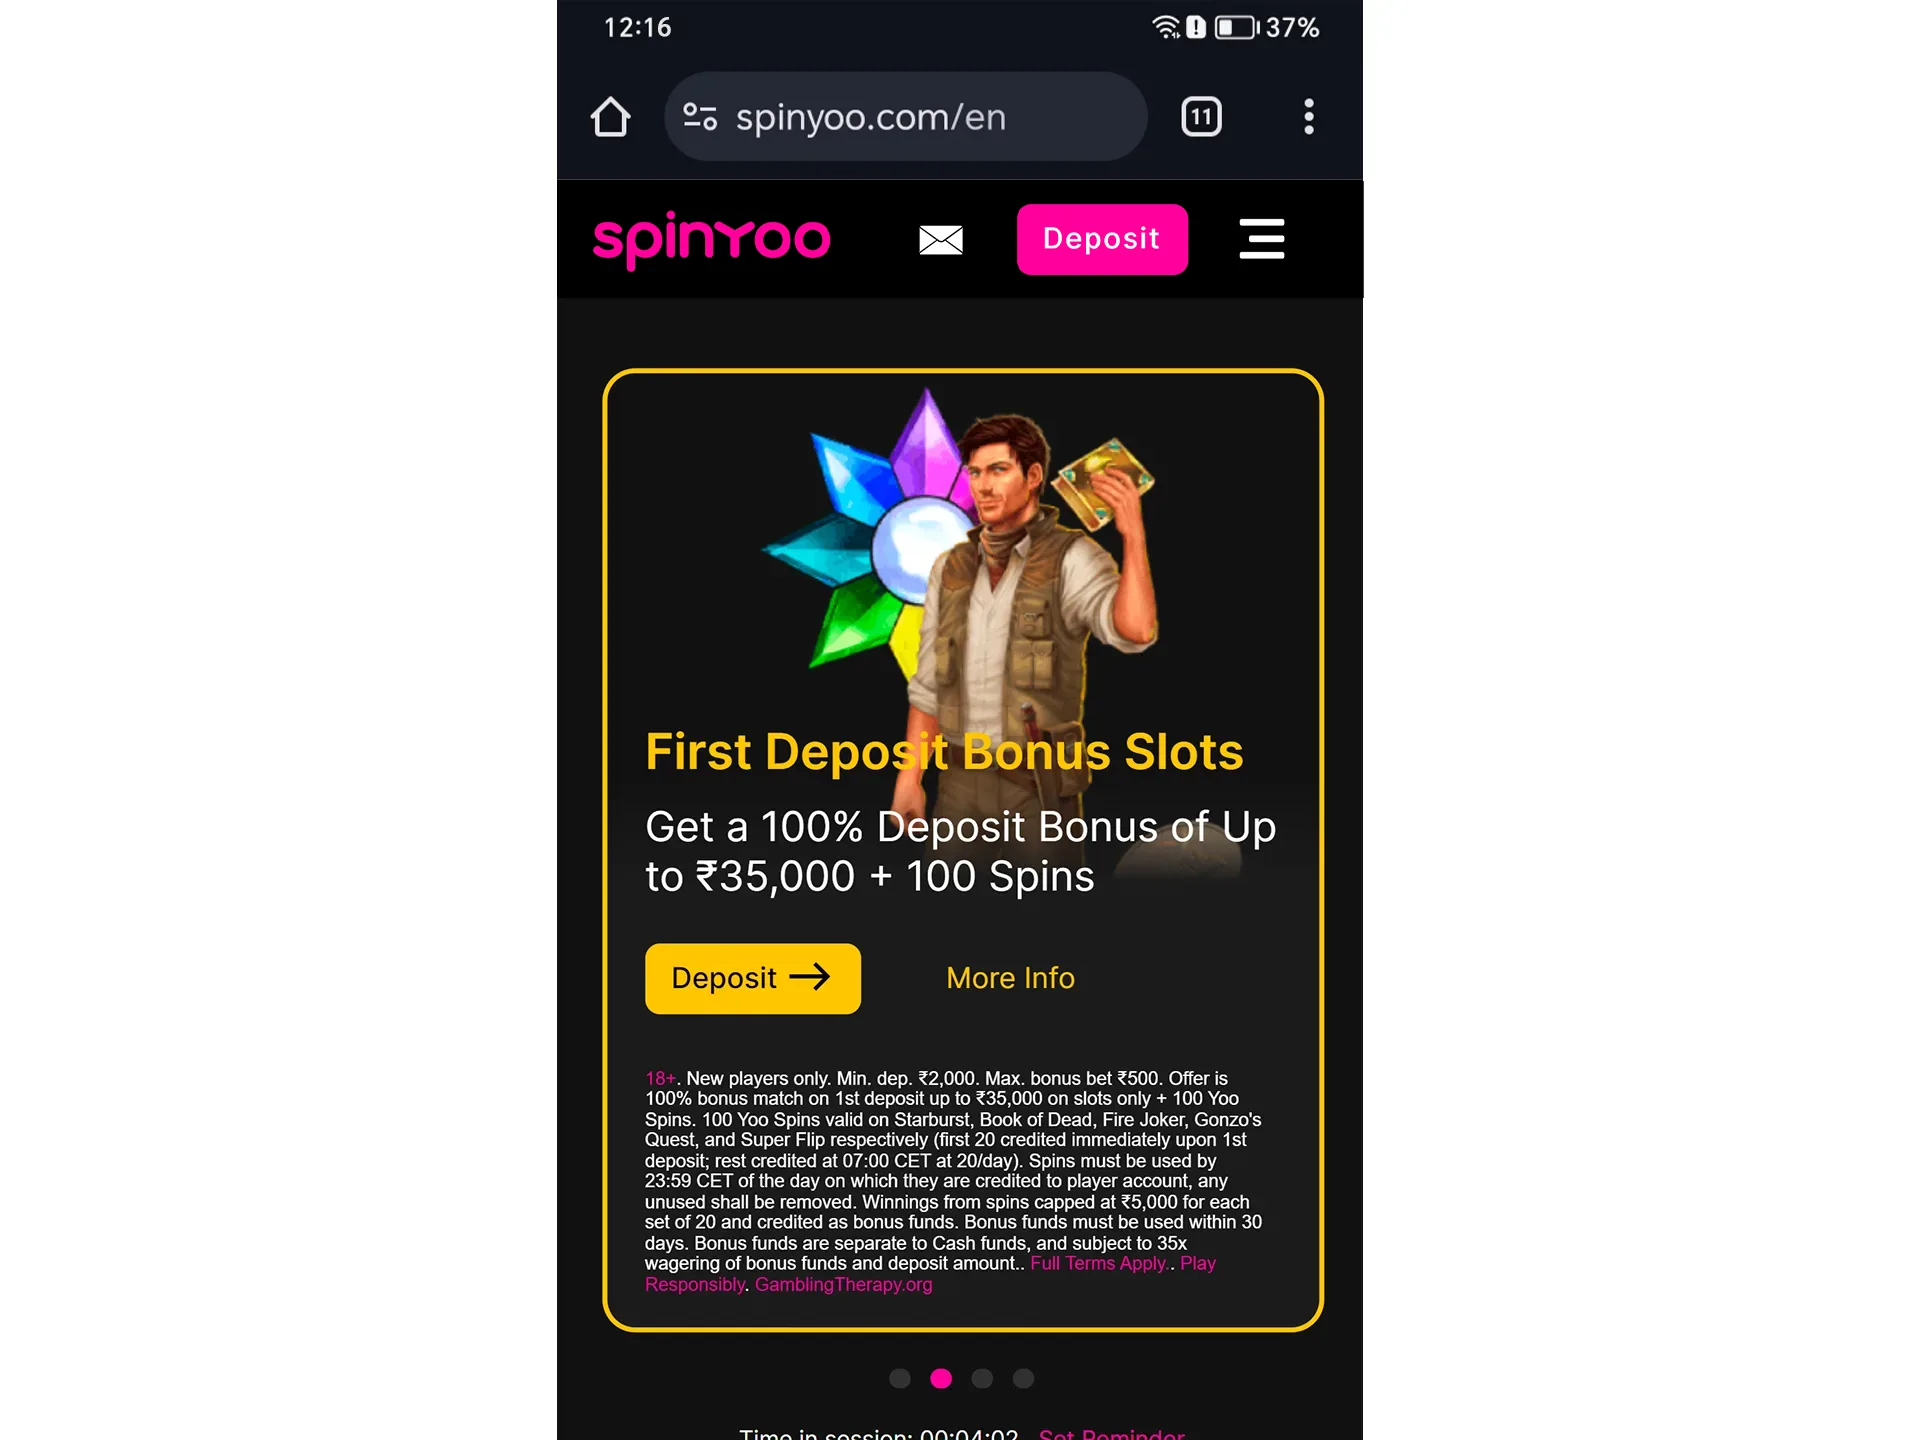 Now you can start using Spinyoo on your device.